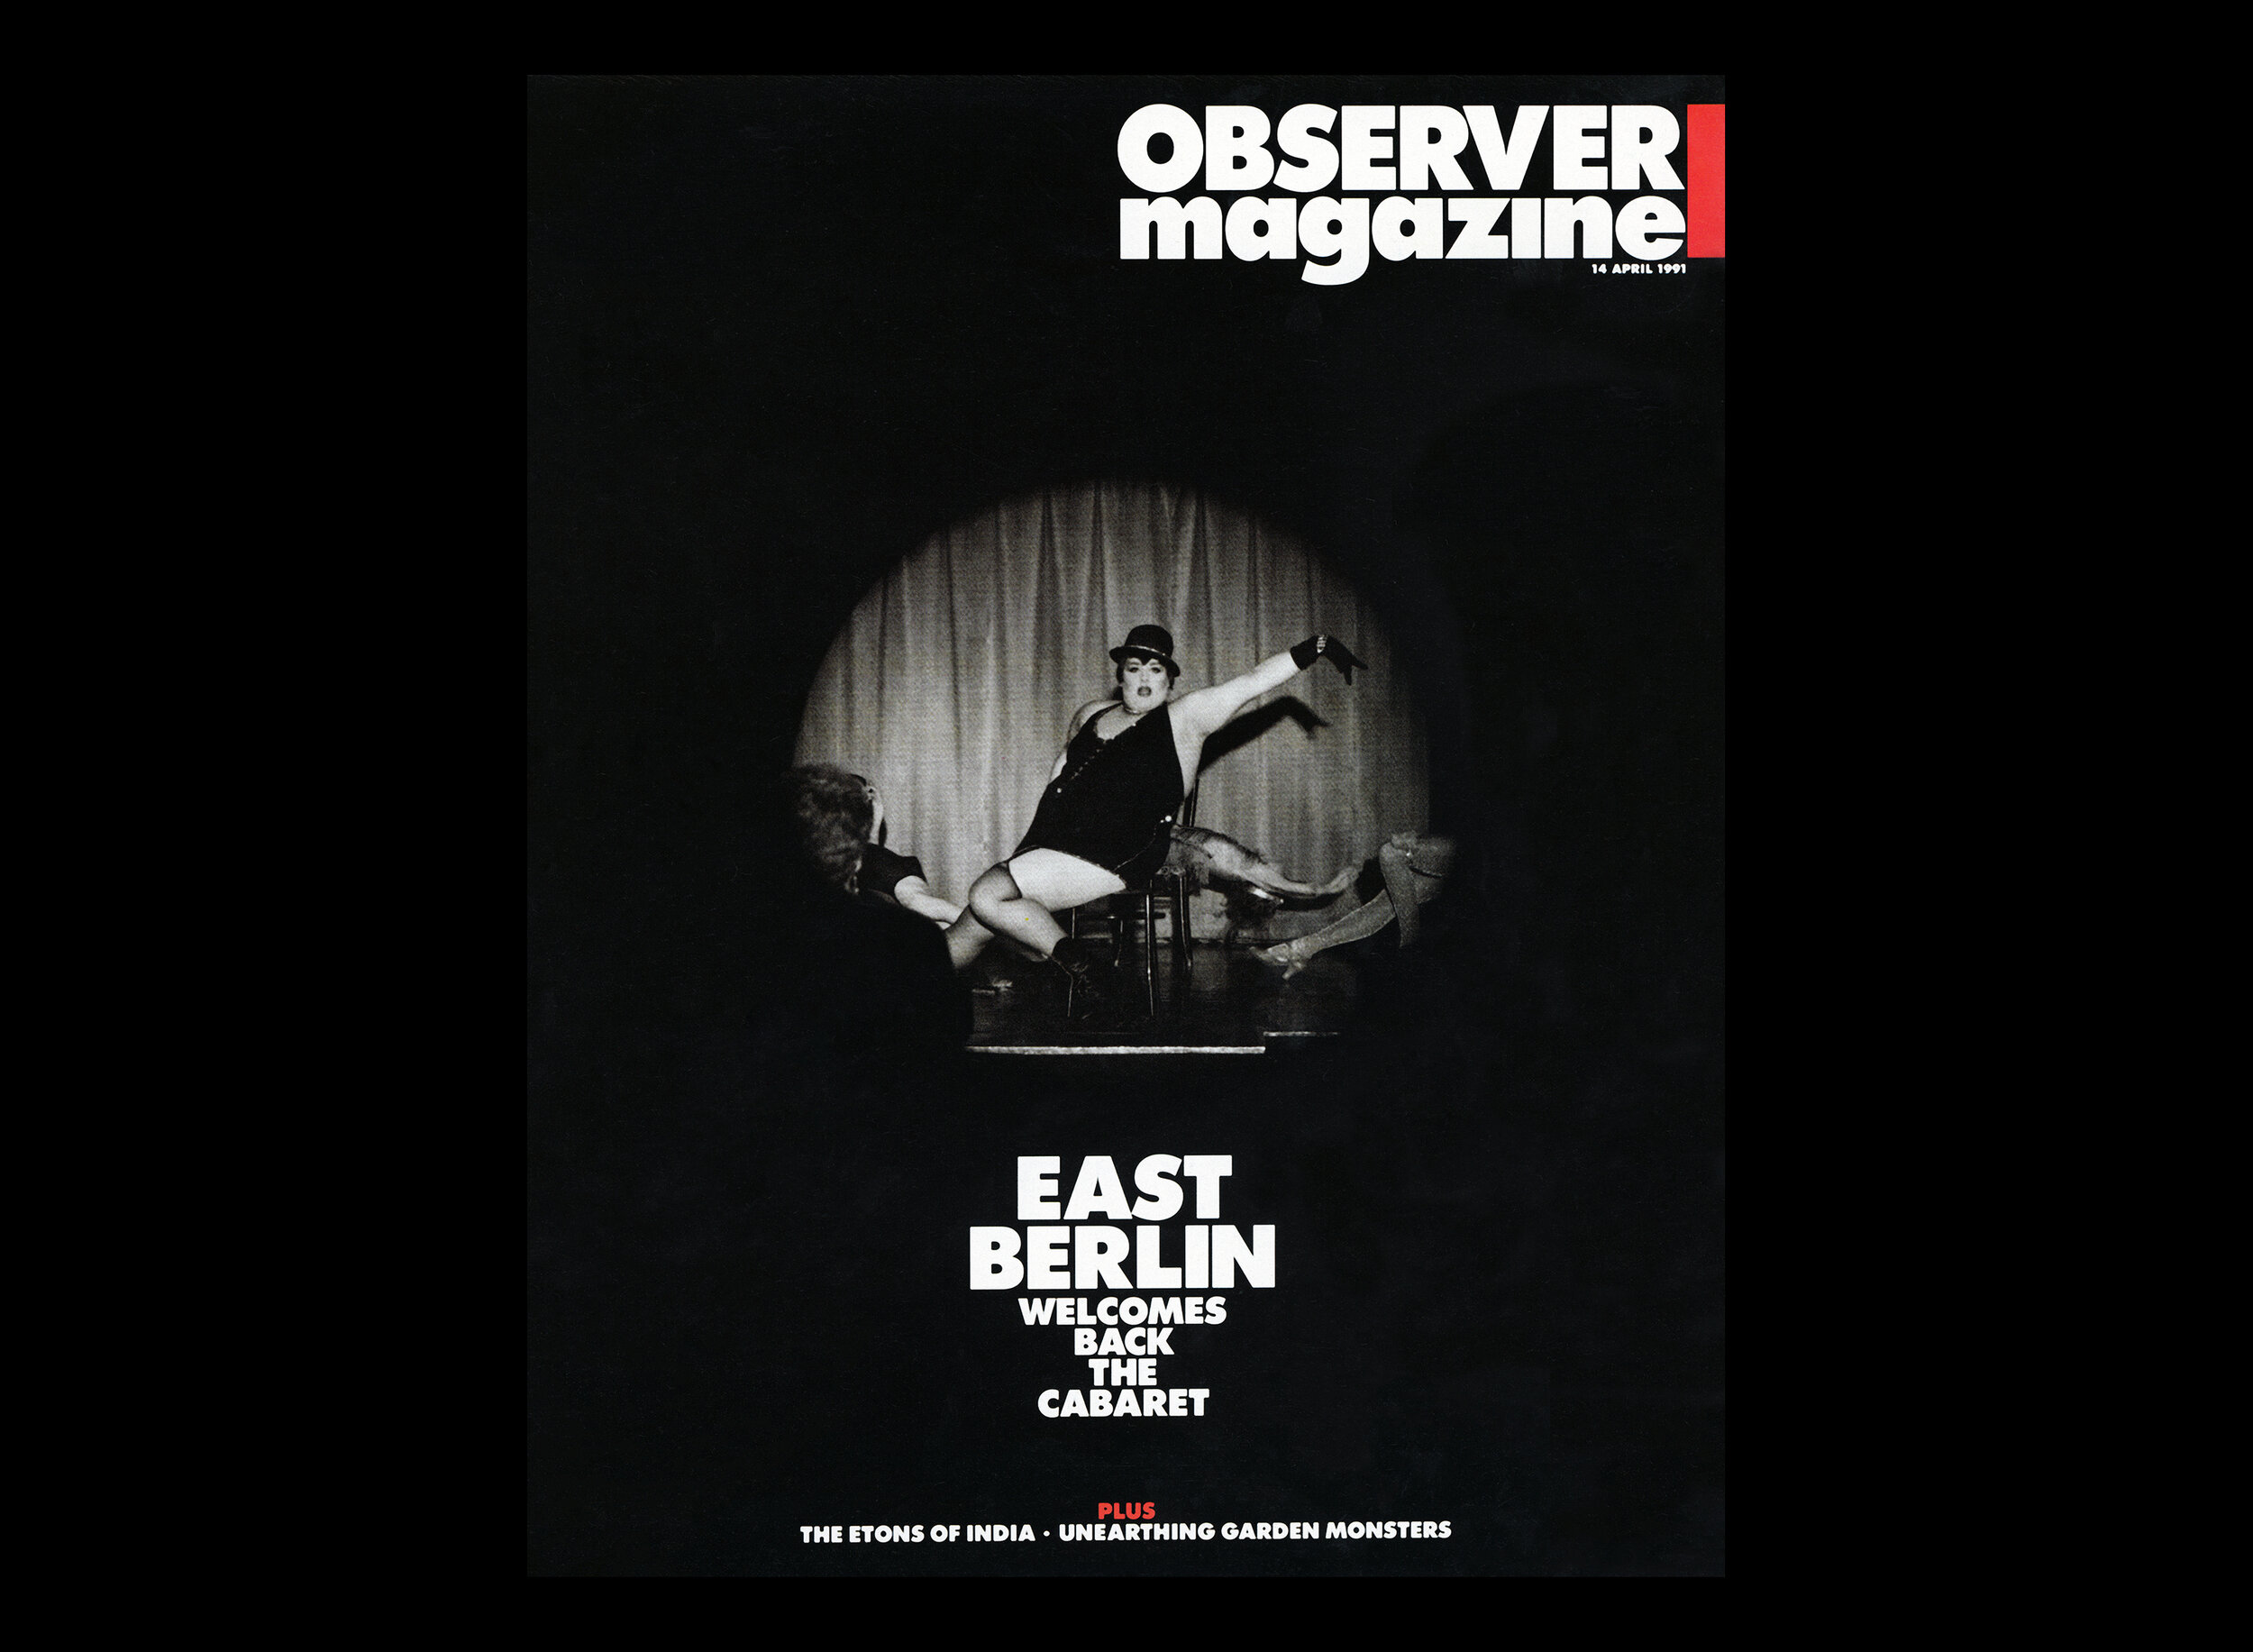  London Observer Magazine, "Berlin After The Wall"  Published on April 14, 1991. 